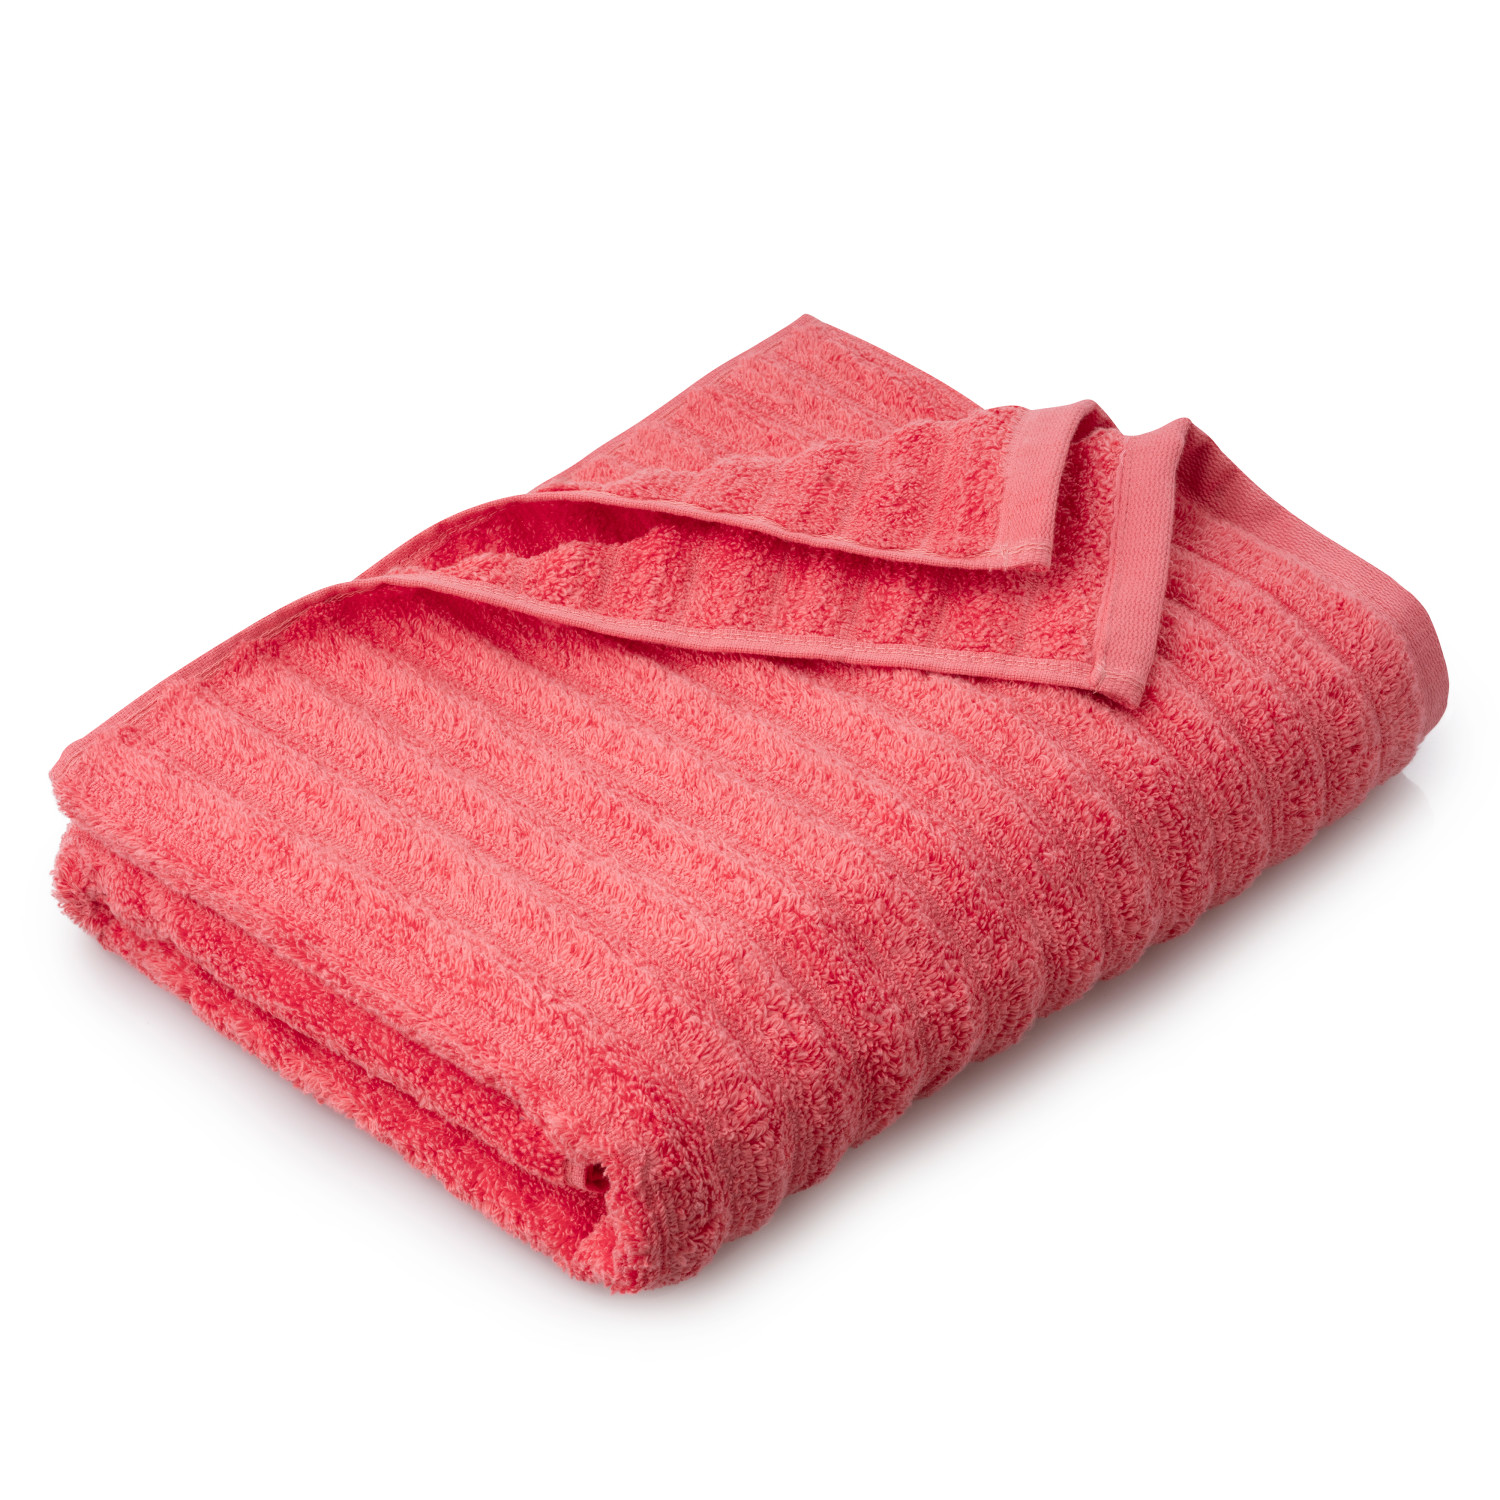 Mainstays Performance 6-Piece Towel Set, Textured Island Coral - image 7 of 7